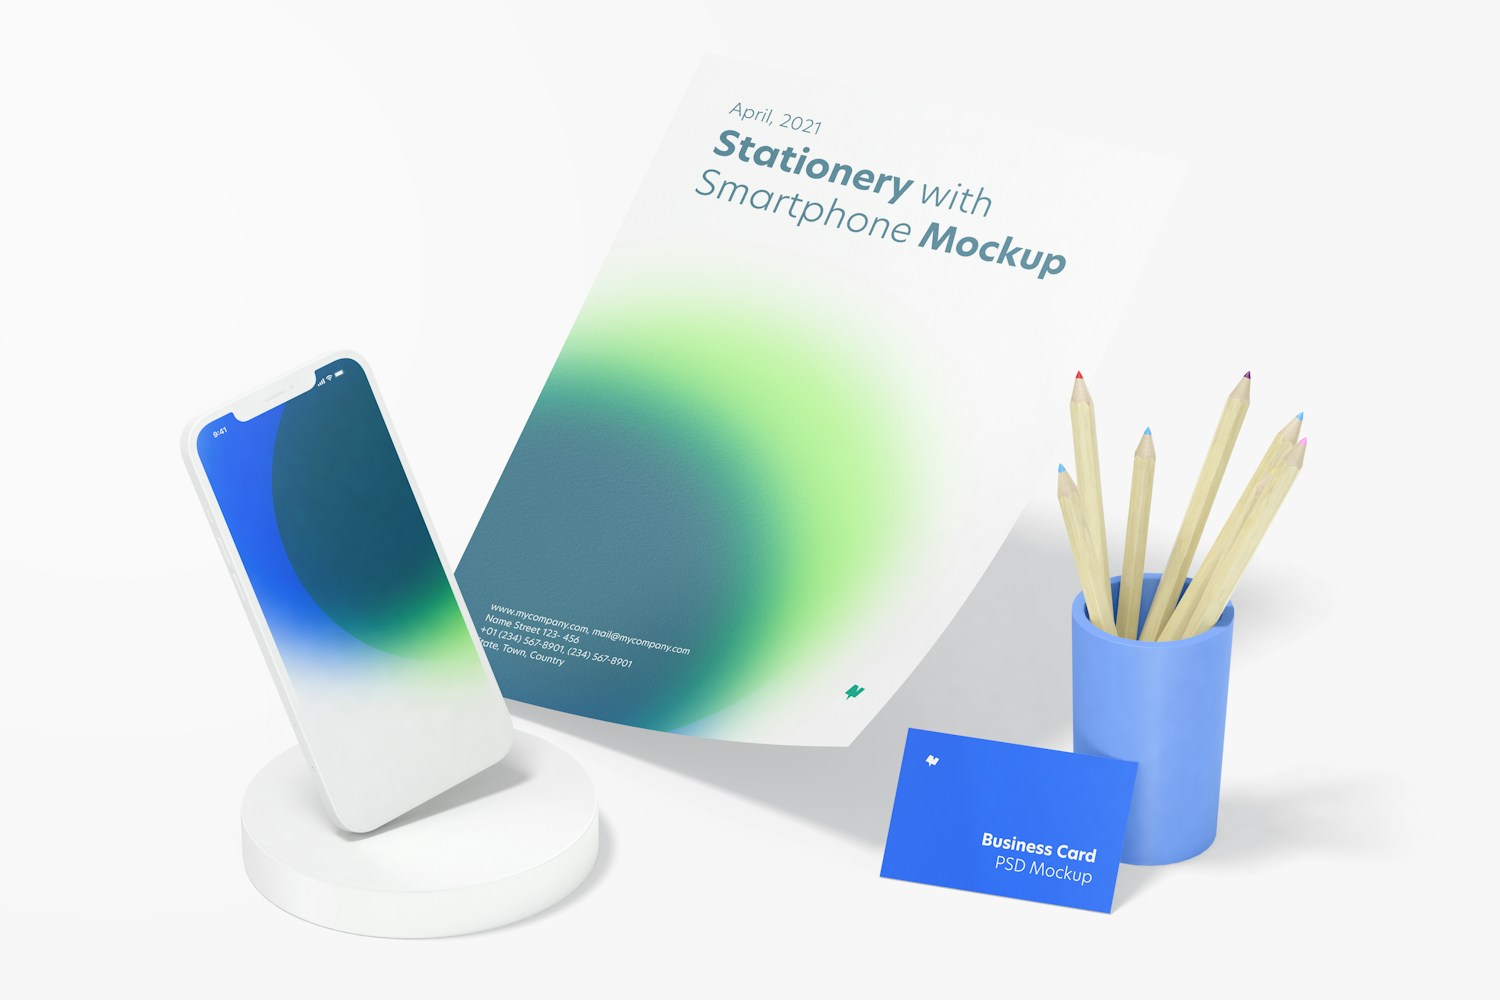 Stationery with Smartphone Mockup, Perspective